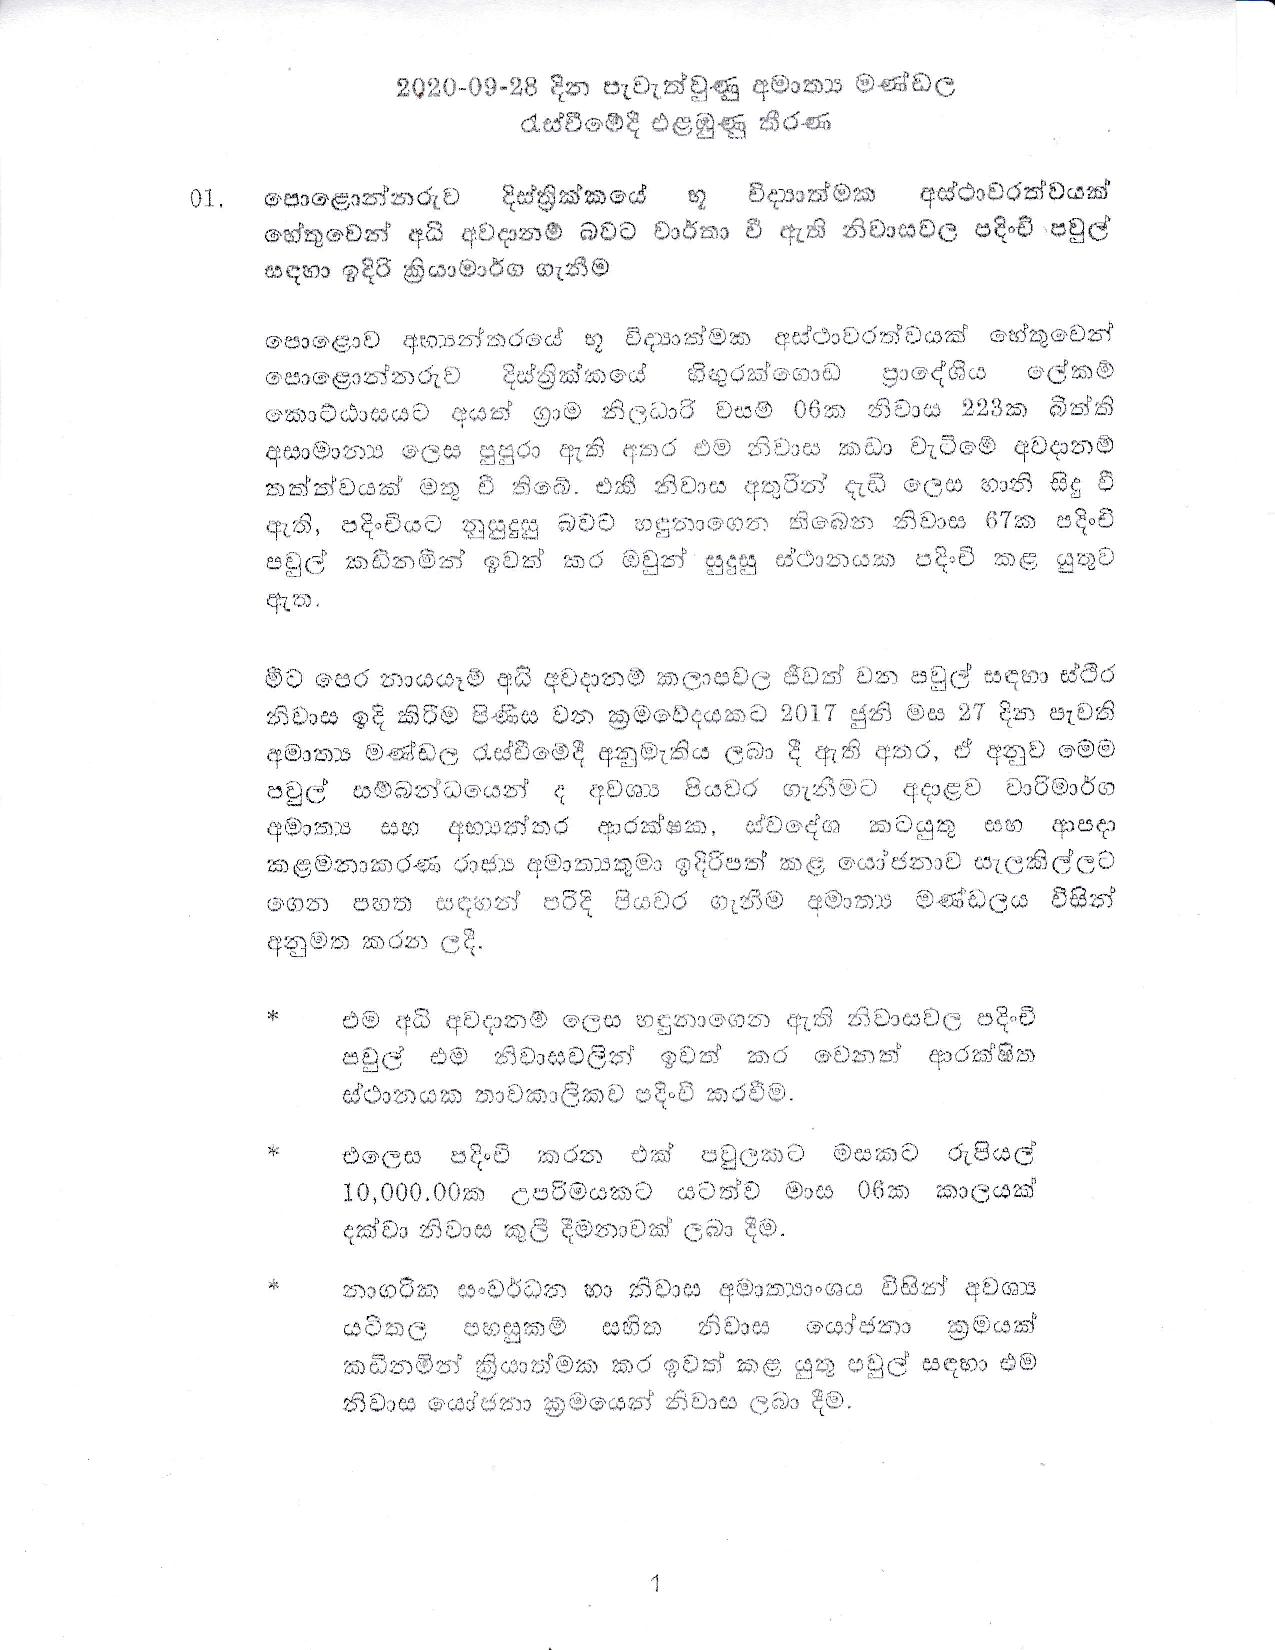 Cabinet Decision on 28.09.2020 page 001